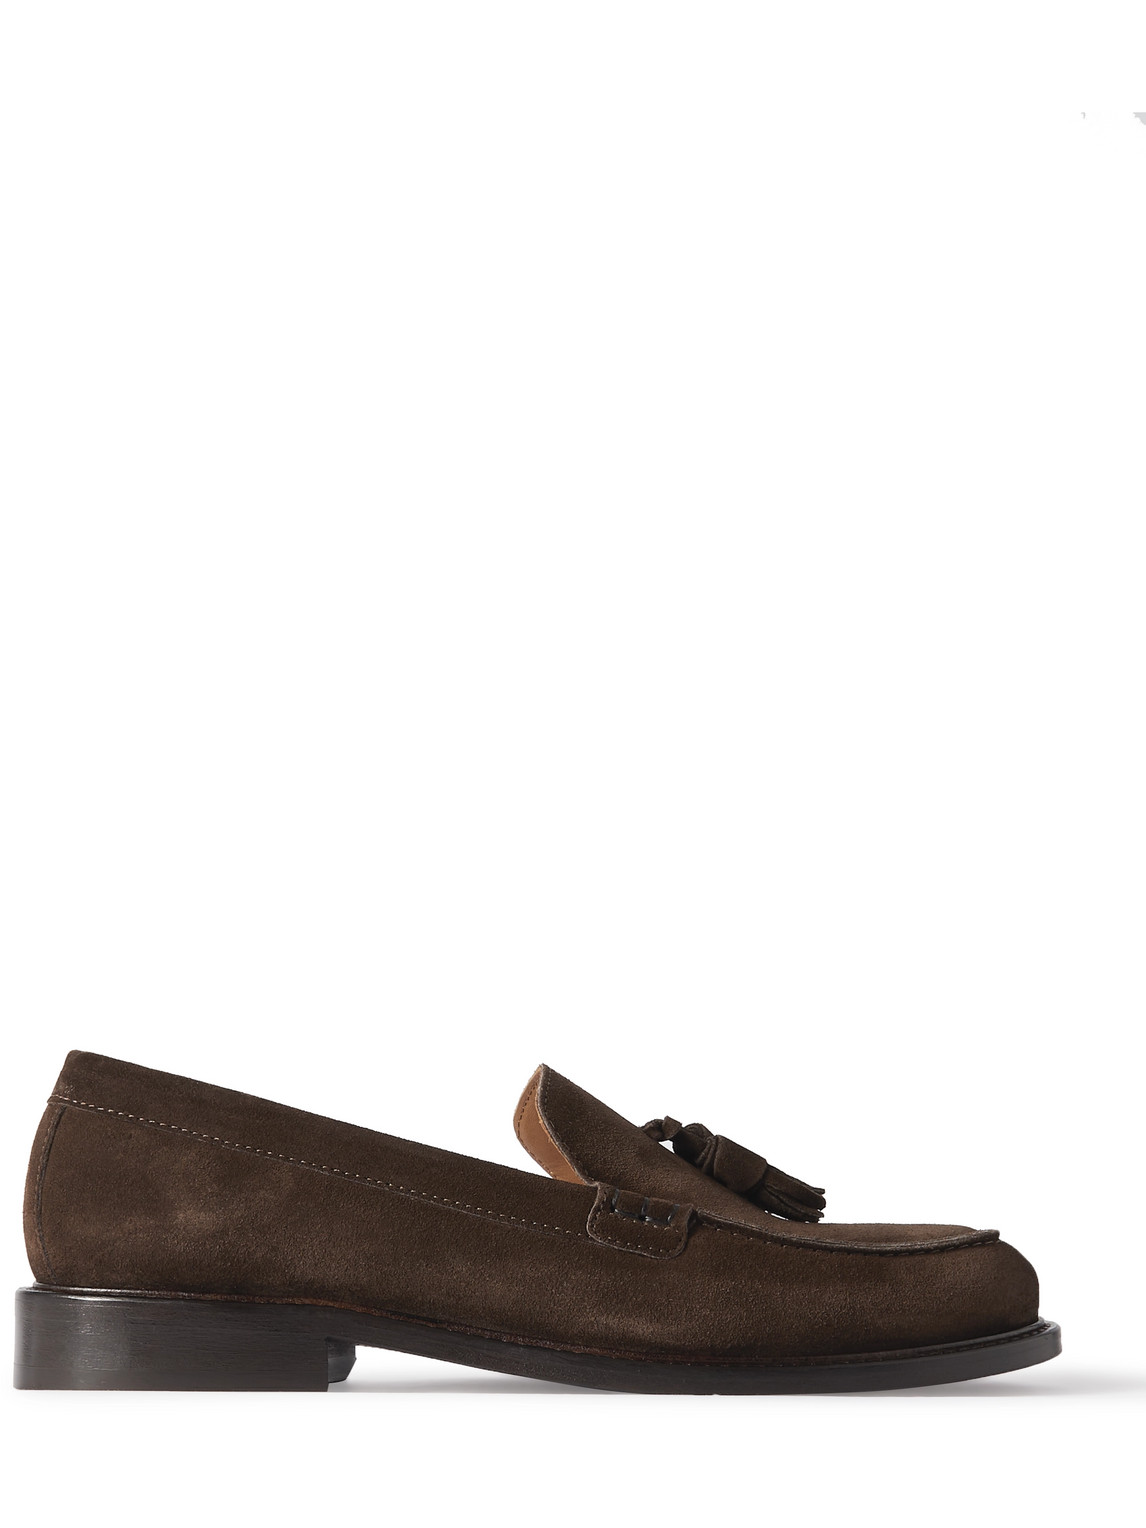 Scott Suede Penny Loafers